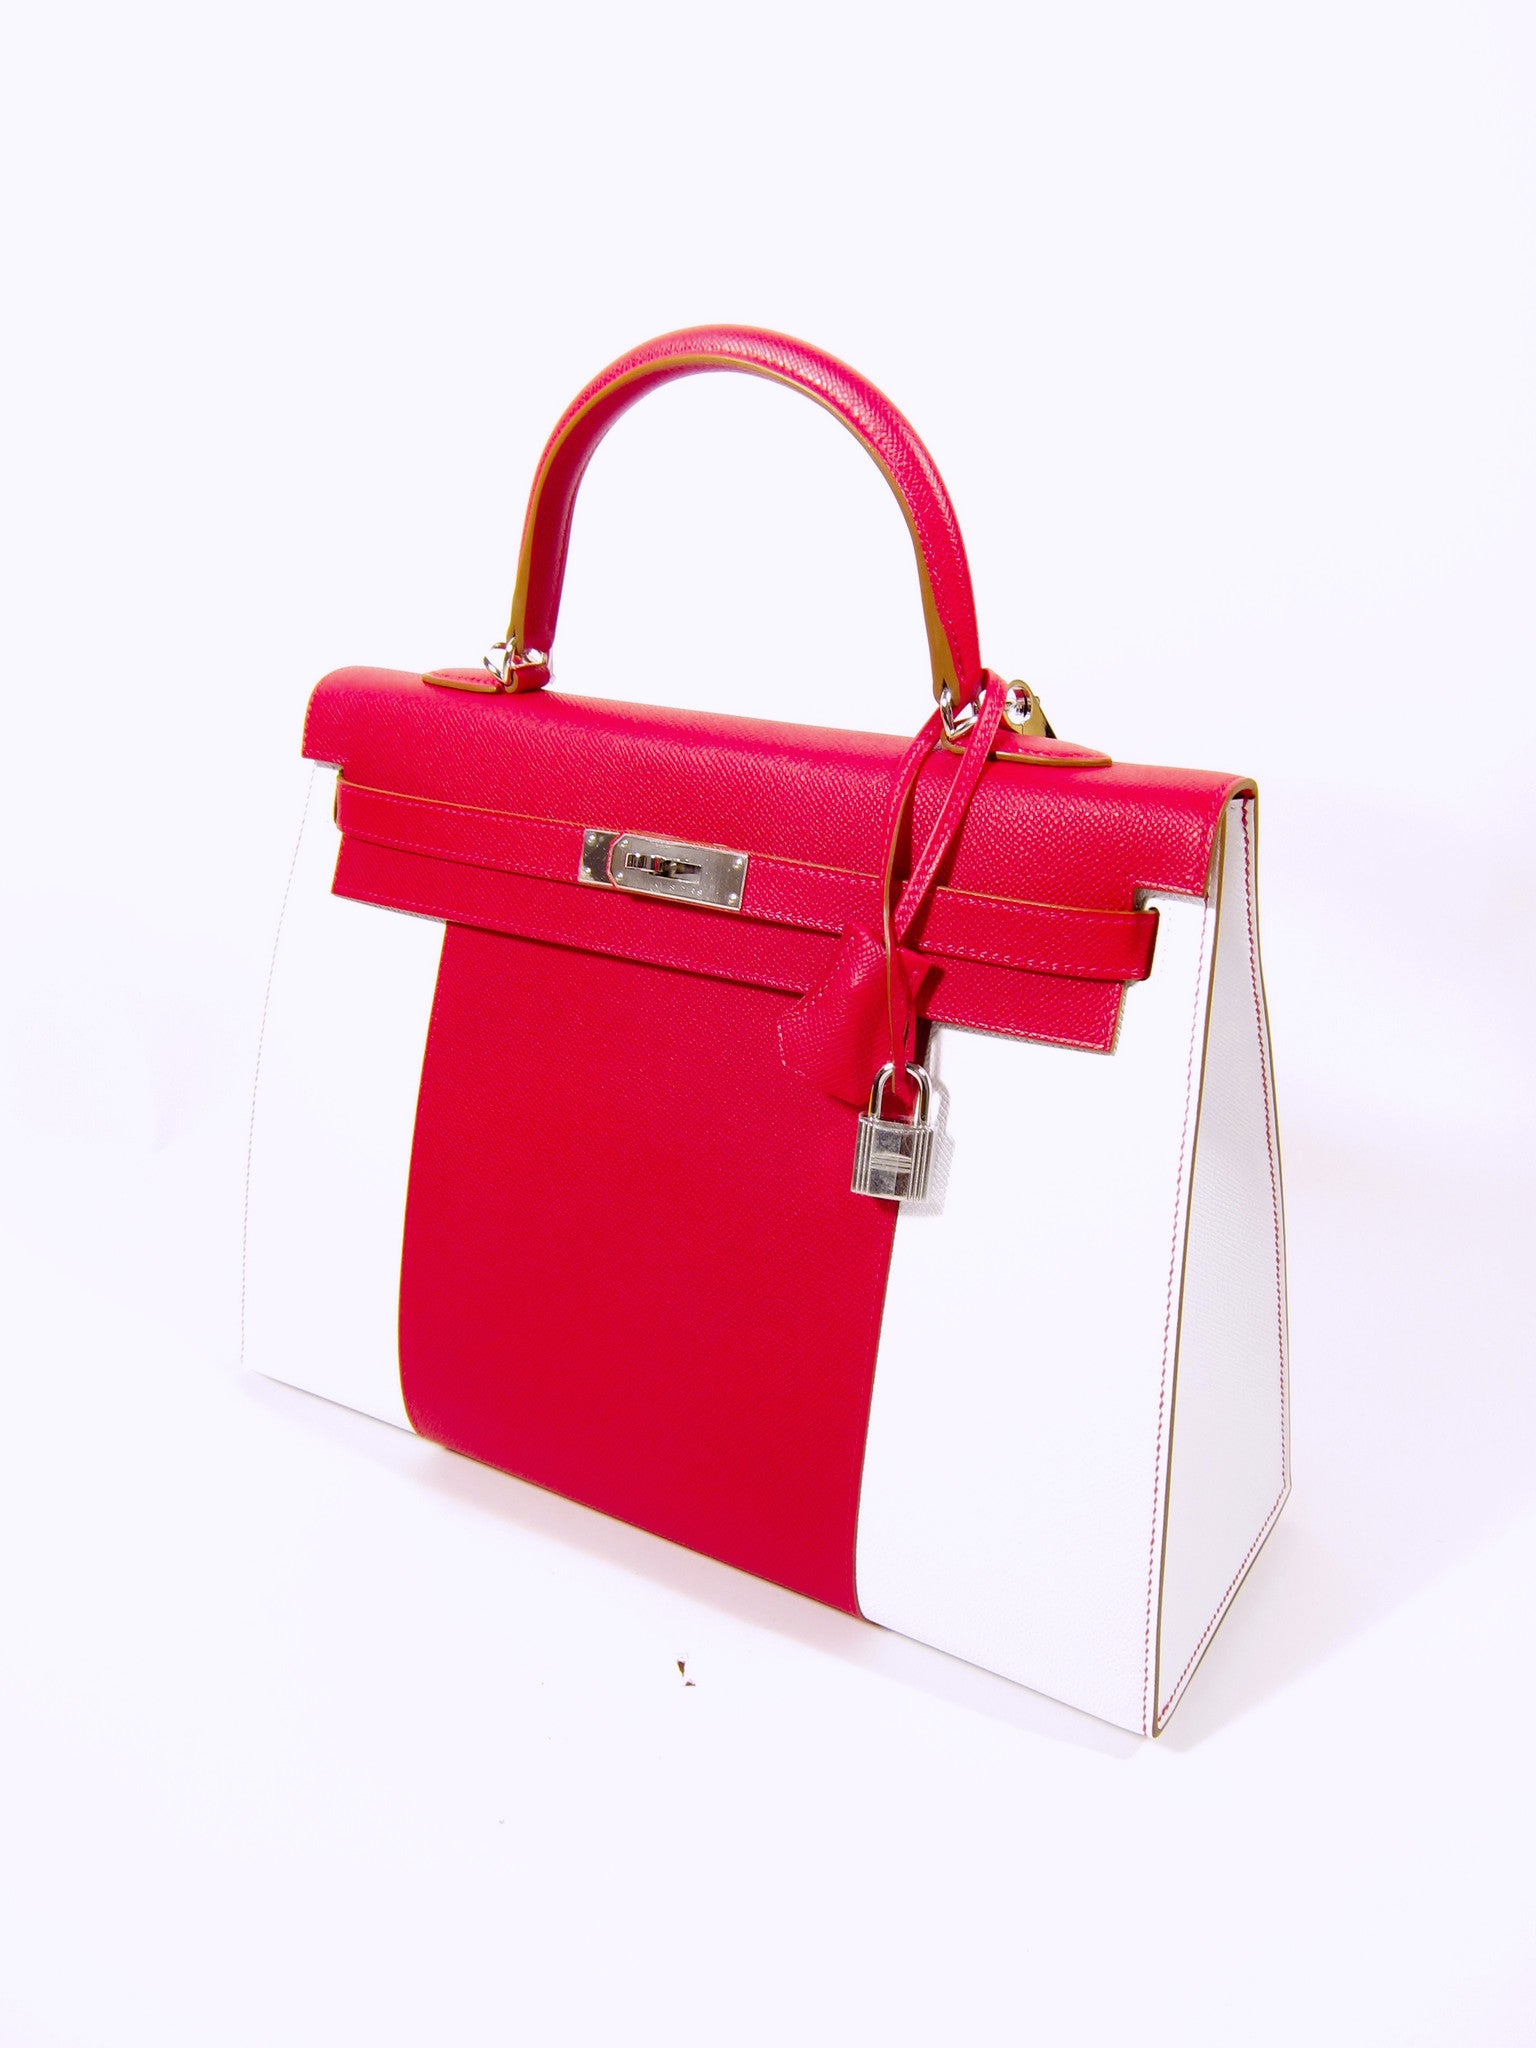 Hermes Kelly 35 Rouge Casaque White Flag/Limited Edition Epsom PHW. Kelly  35 Bag